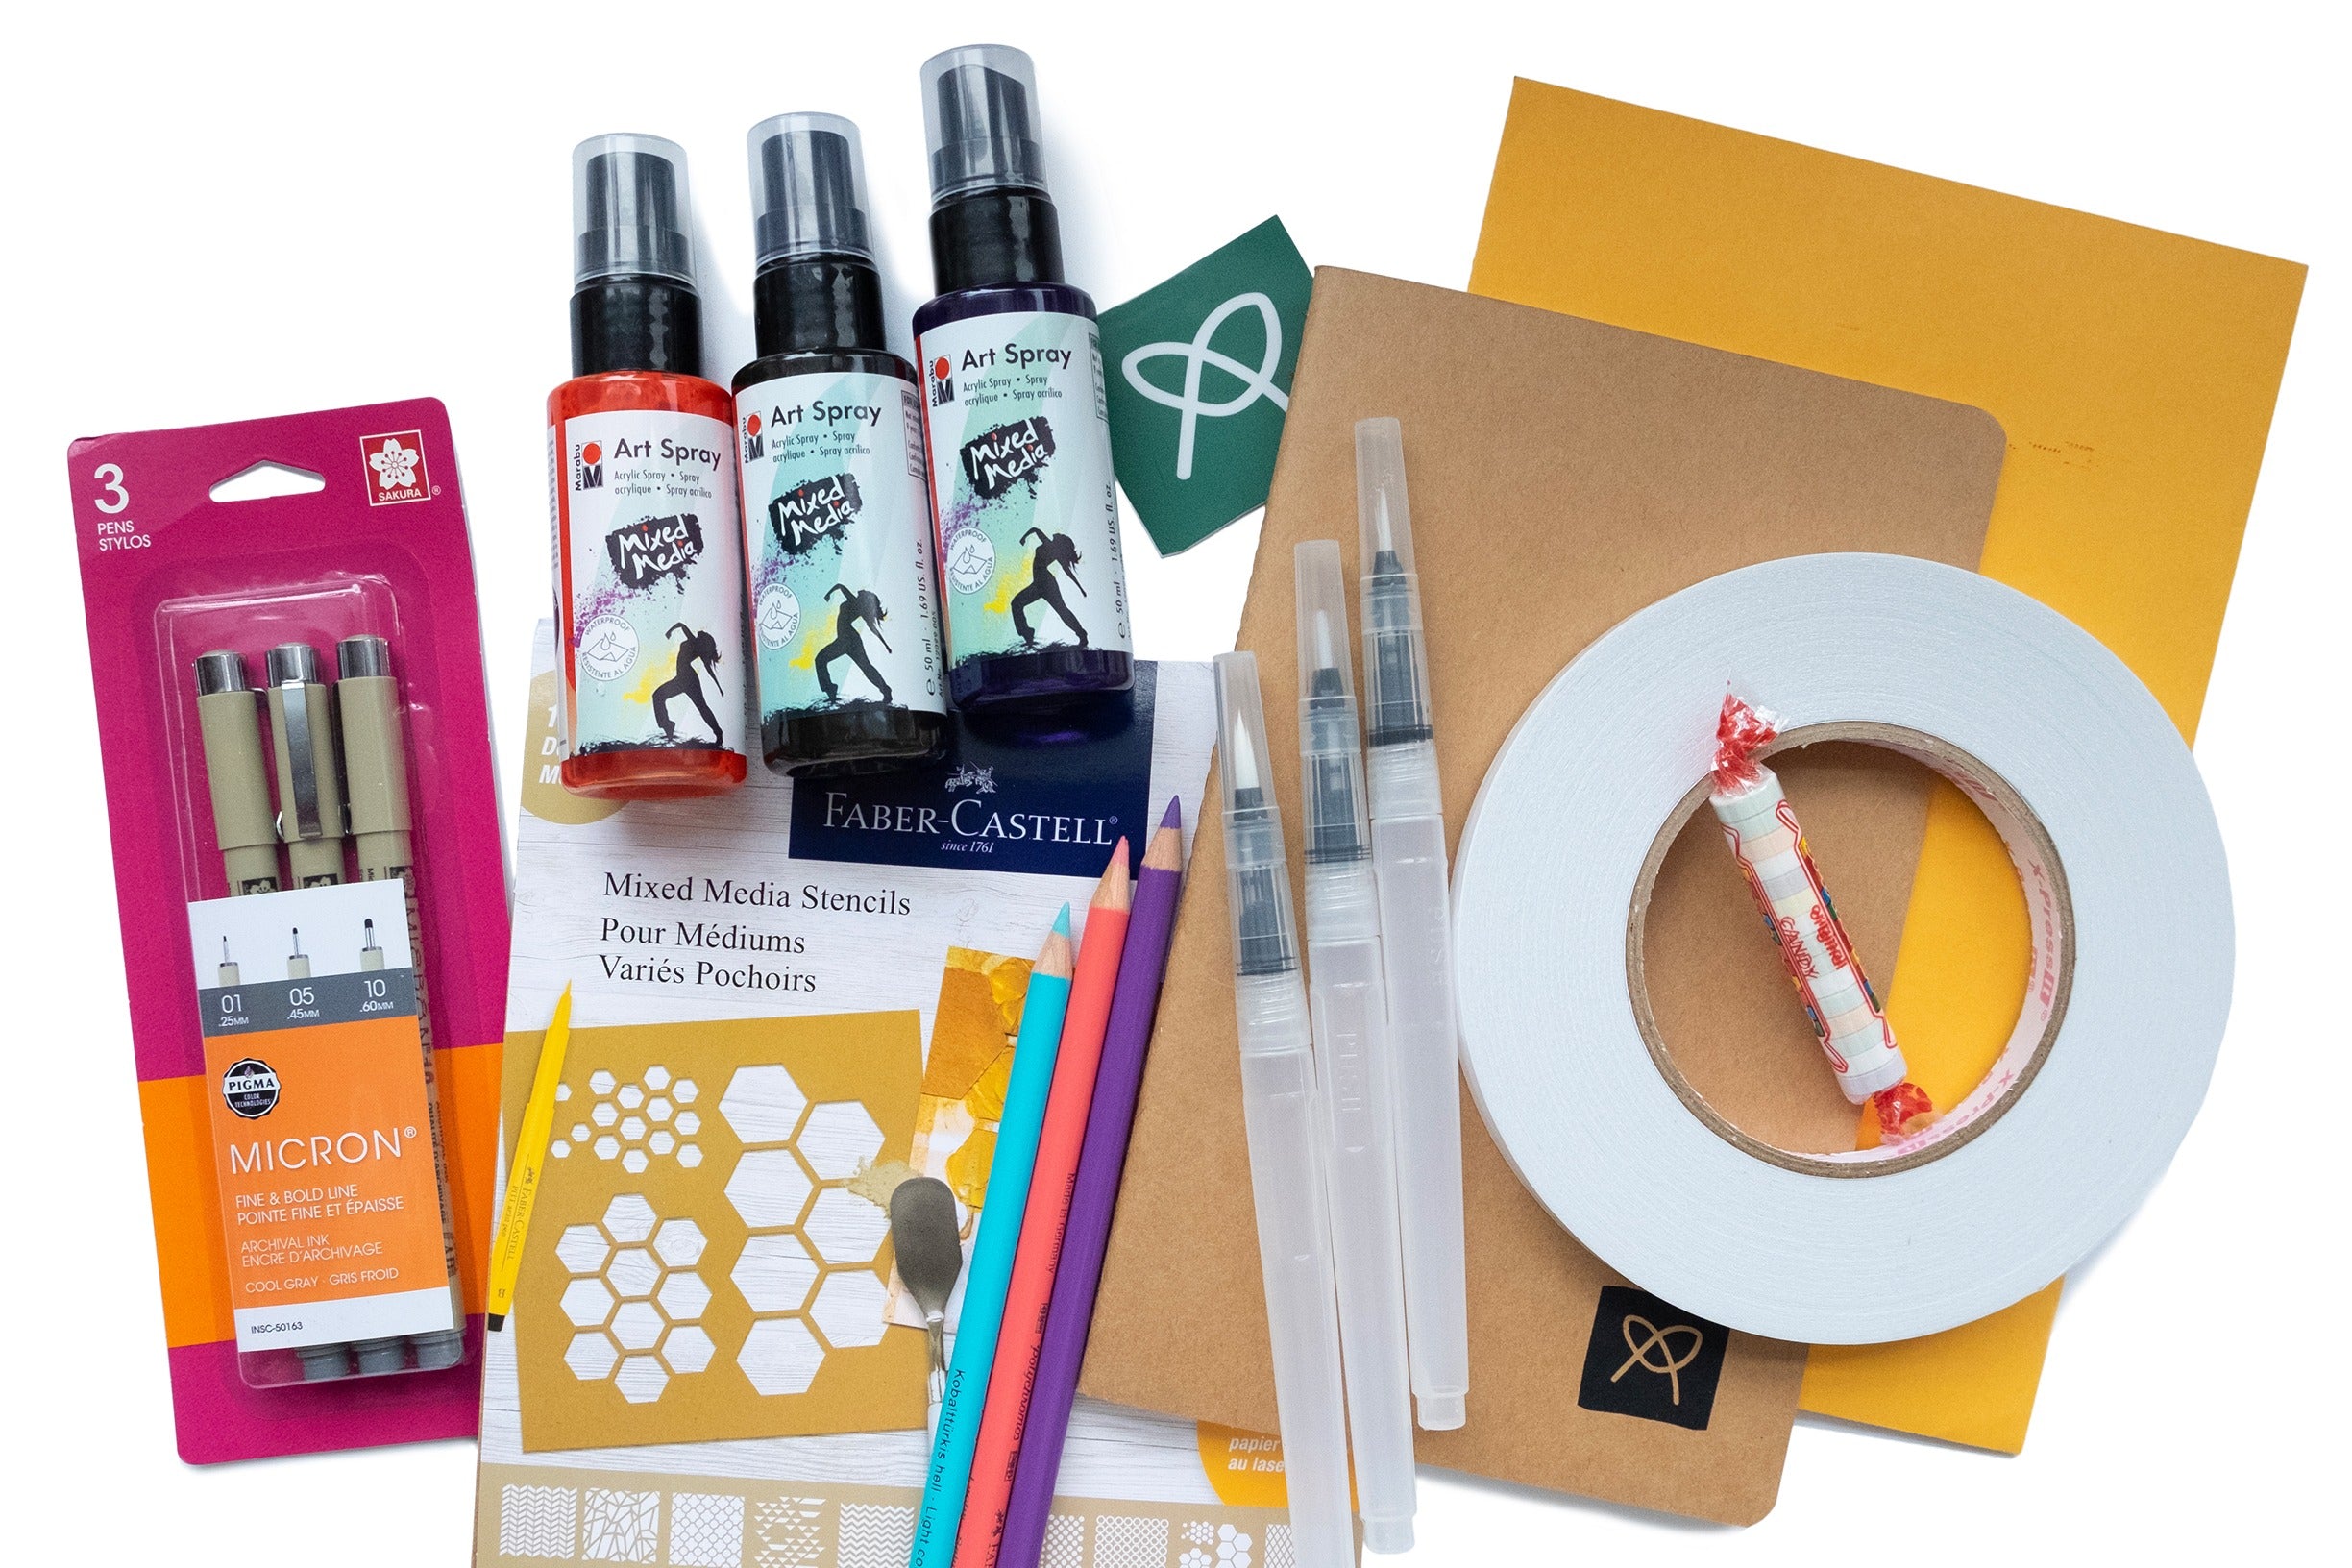 Let's Paint Together Subscription Box